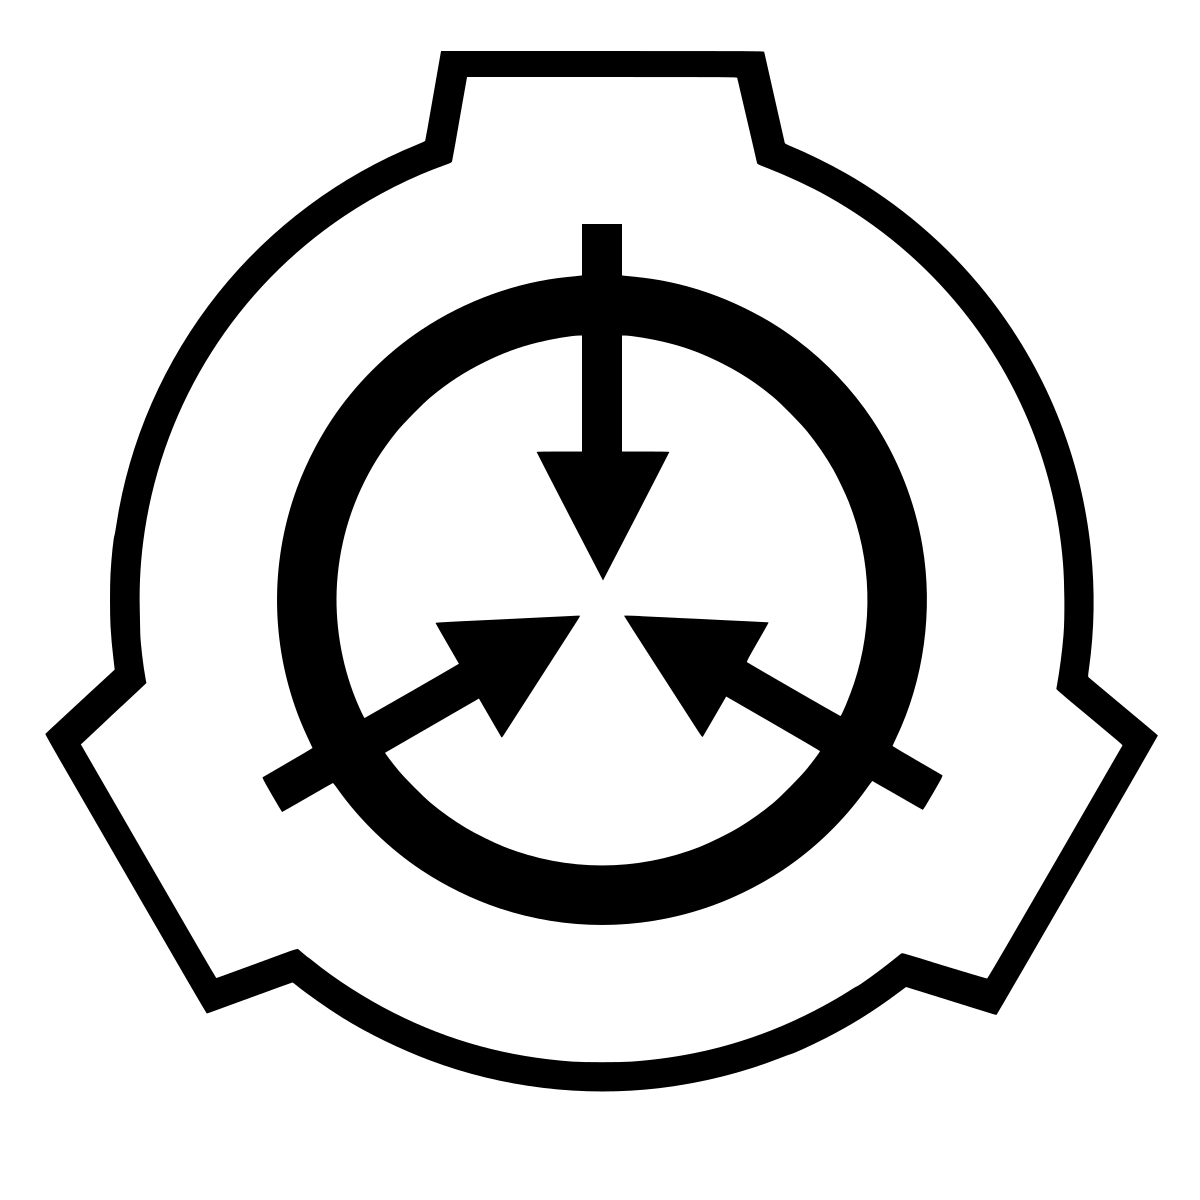 SCP-6661 - SCP Foundation